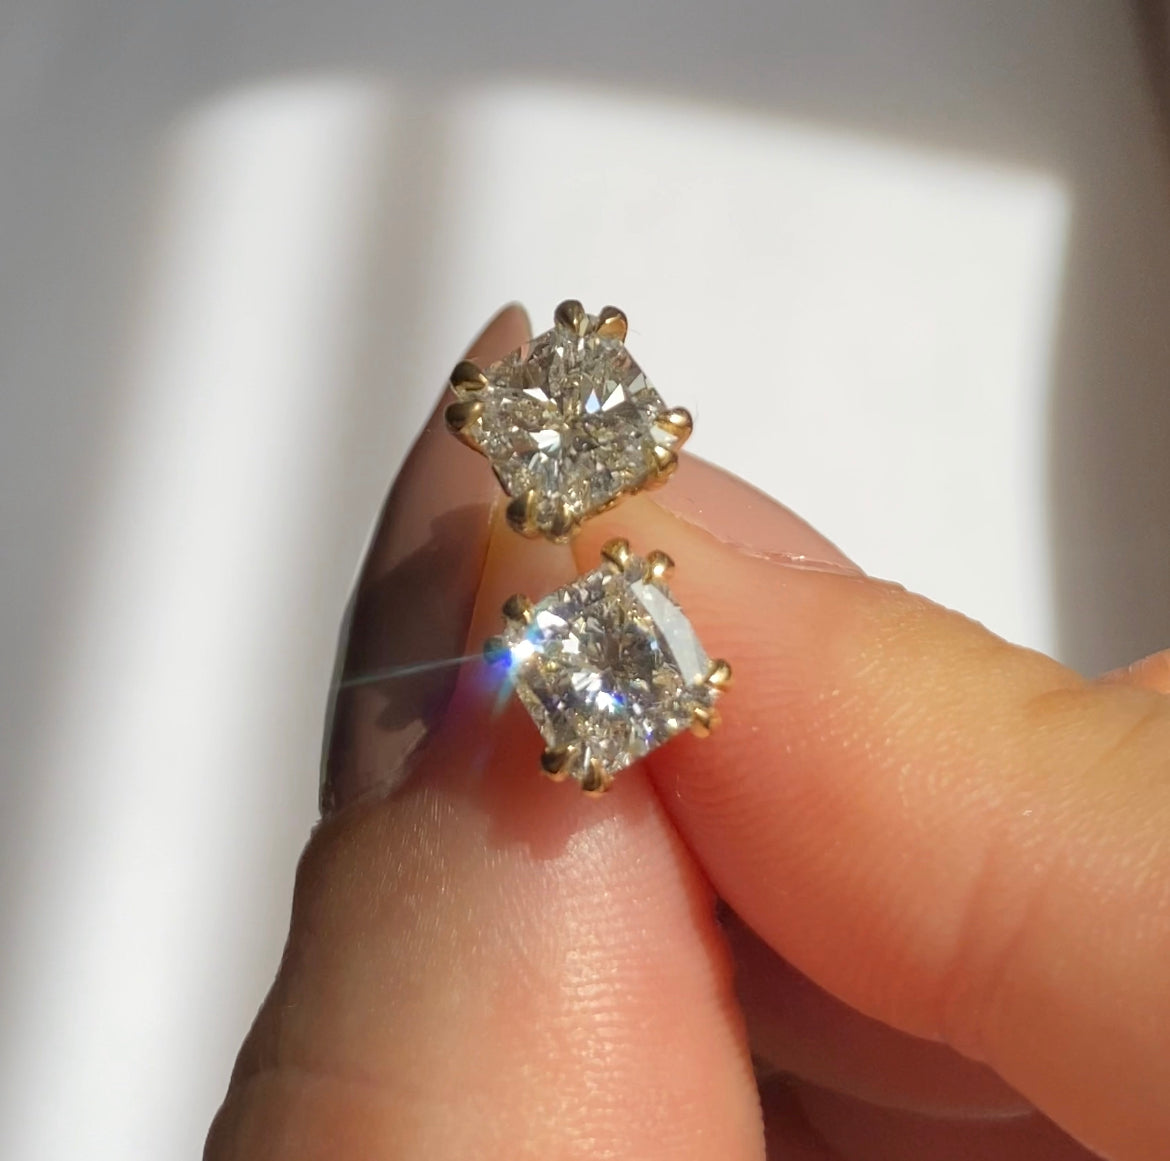 A pair of cushion cut white diamond earrings set in 18k yellow gold held between two fingers on white background